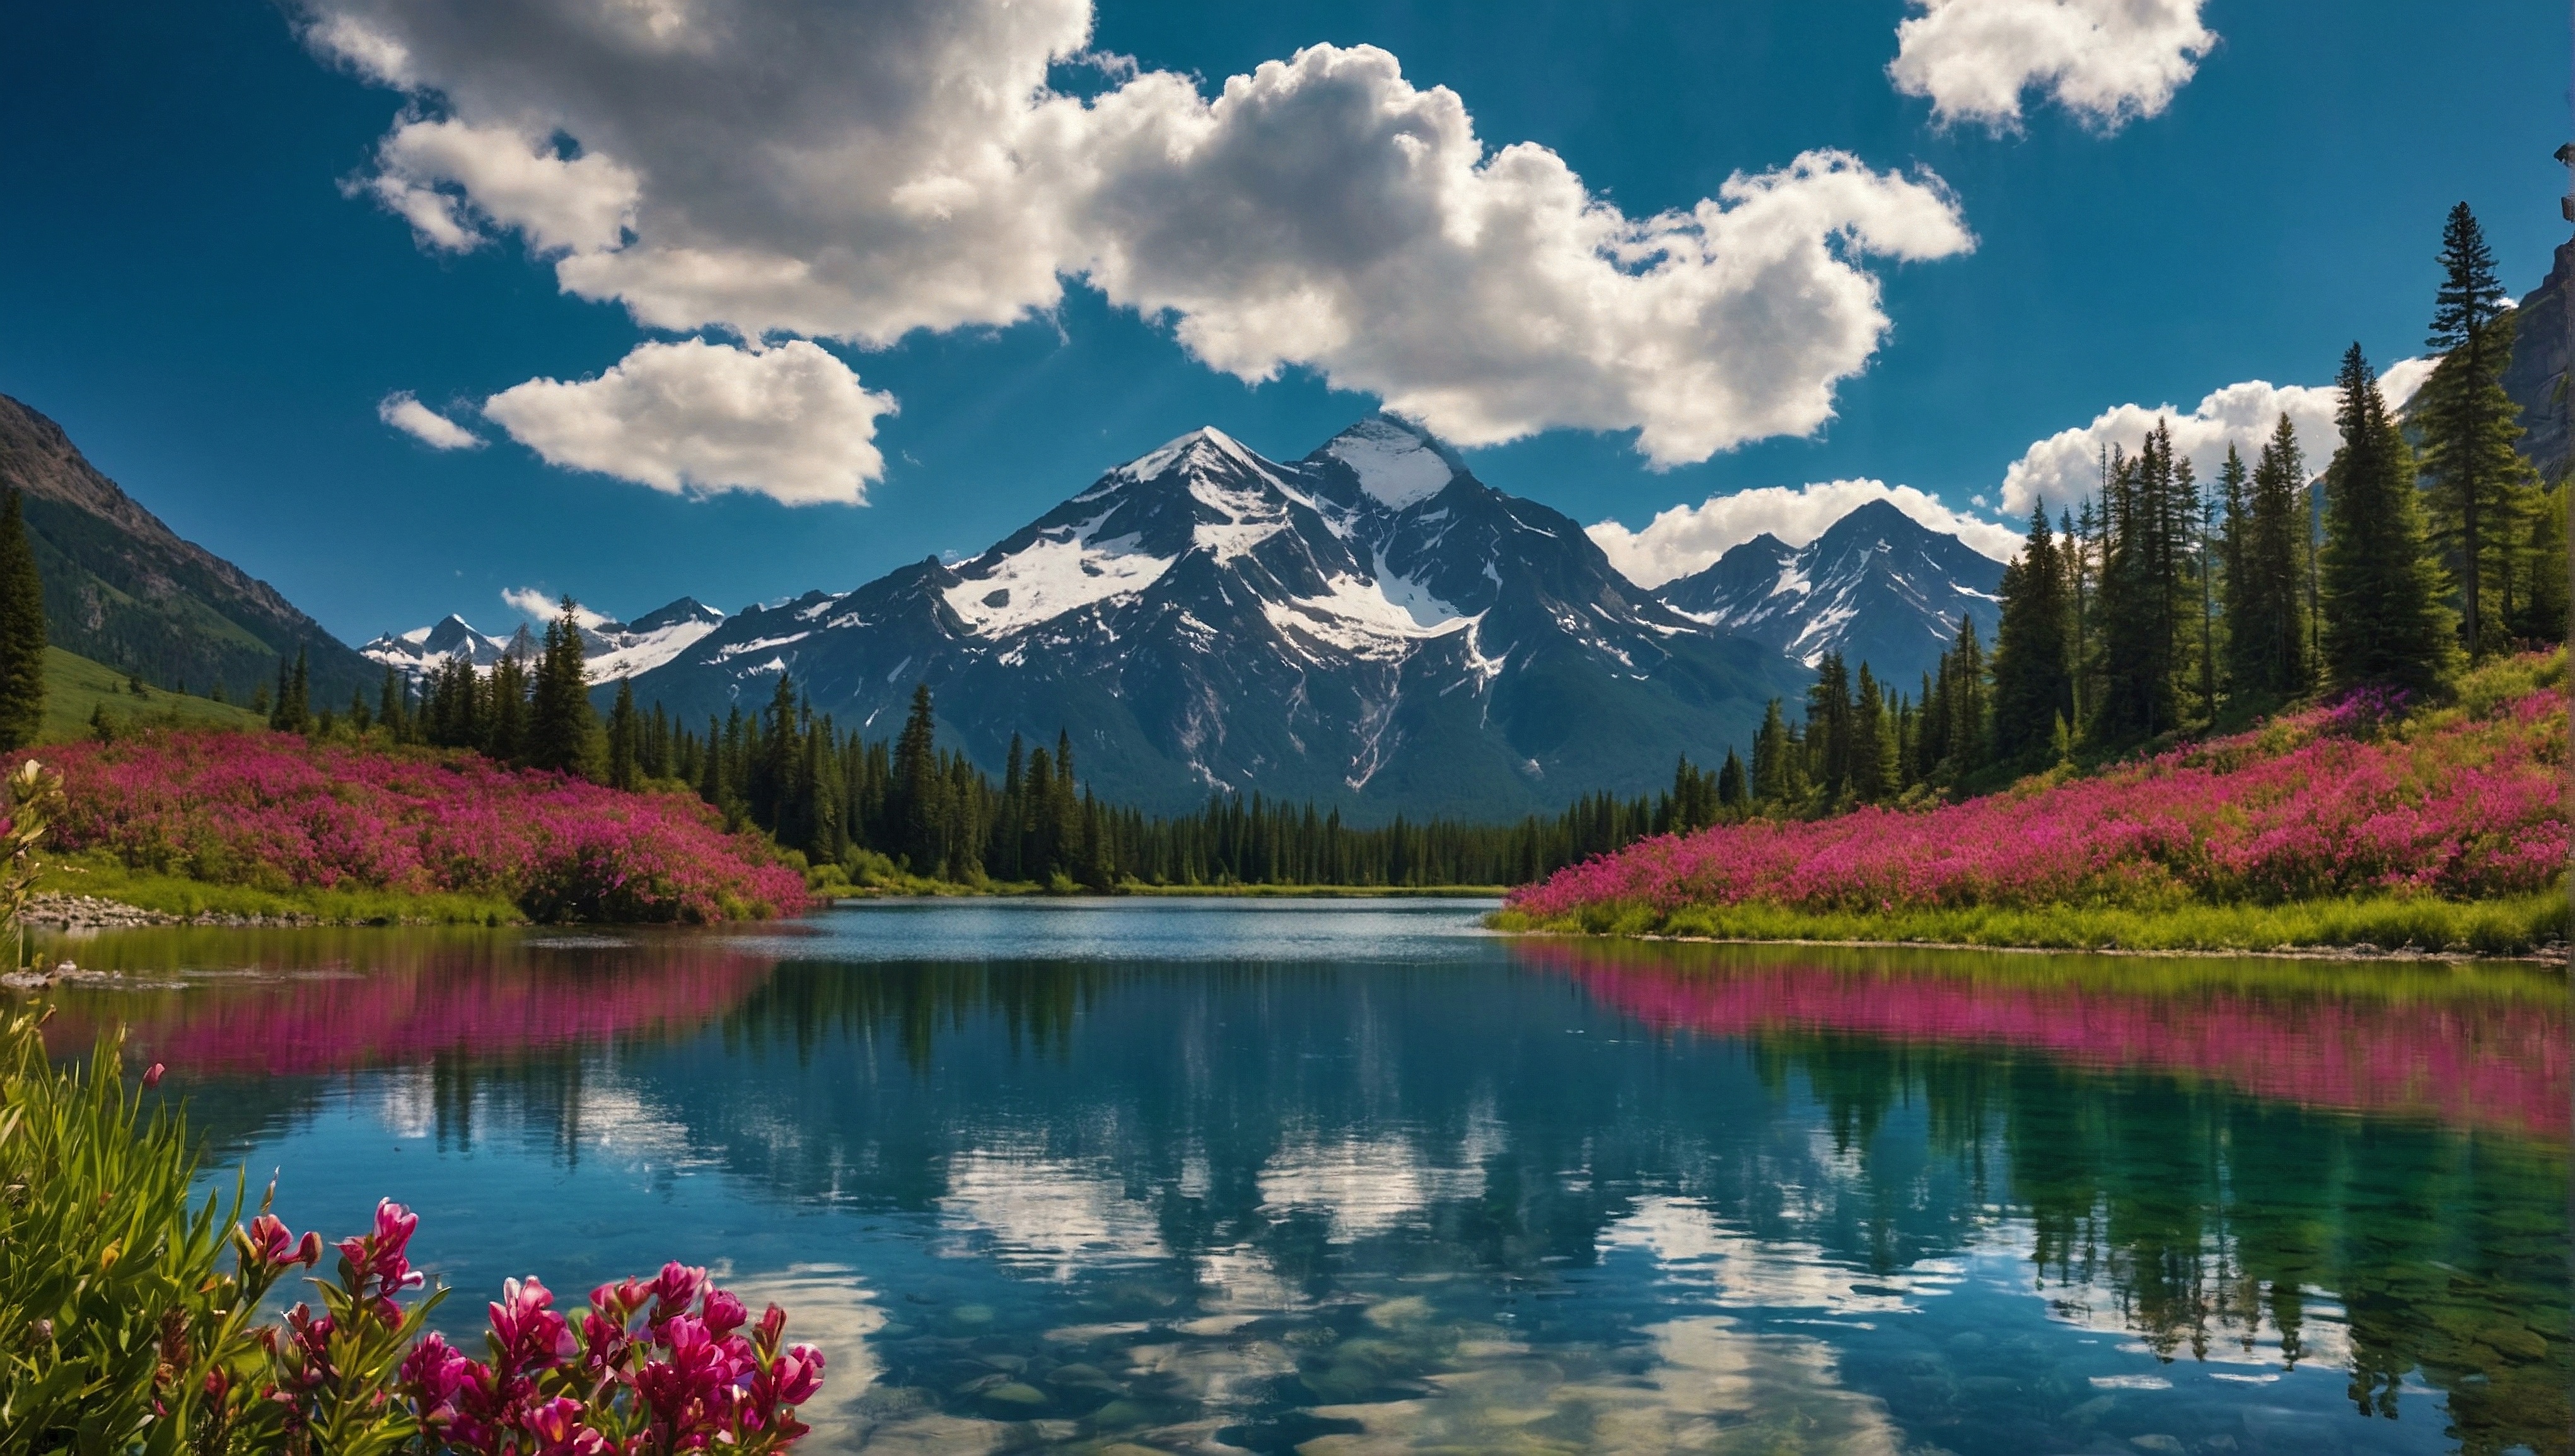 A beautiful scene with flowers and some snow capped mountains